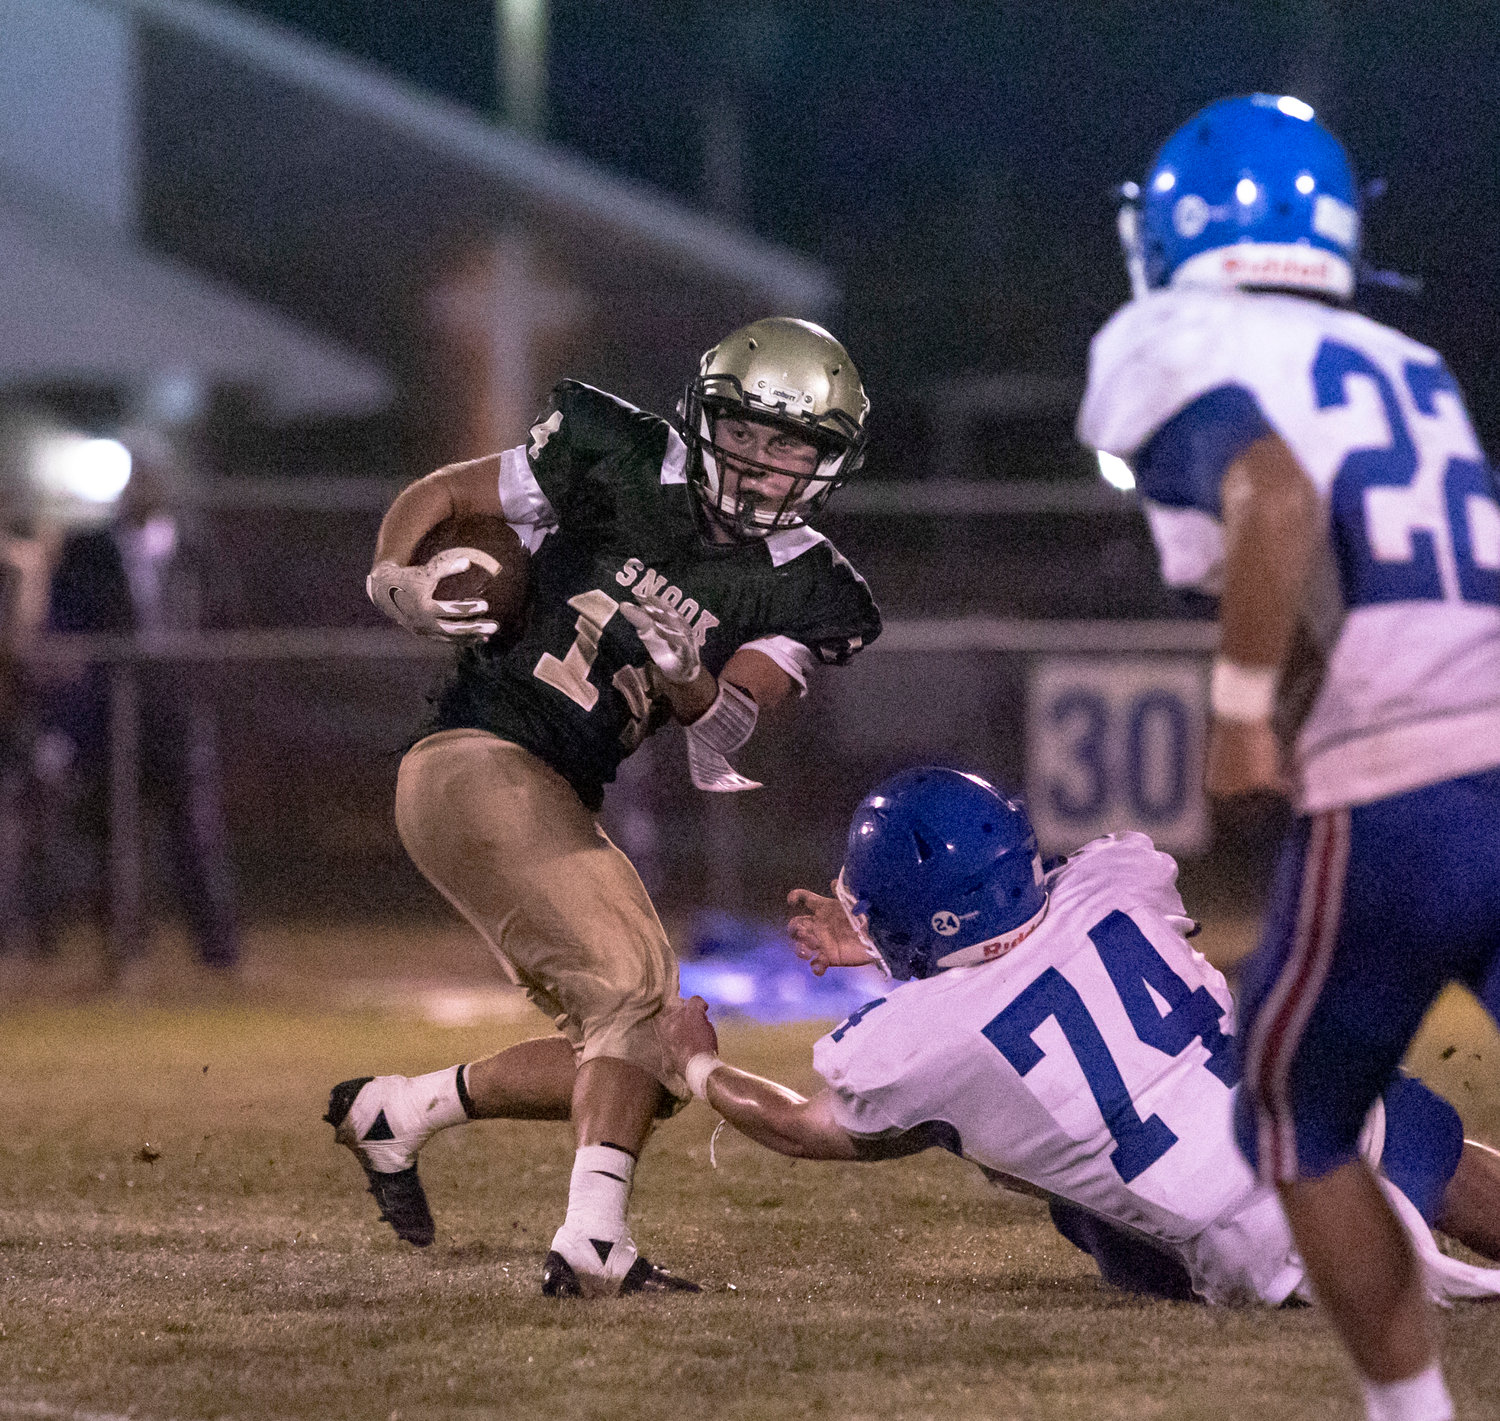 Eagle junior Corbin Hall spins off a defender and looks for more running room after a catch in the first half of Snook Christian Academy’s last home game of the season against Crenshaw Christian Friday night.